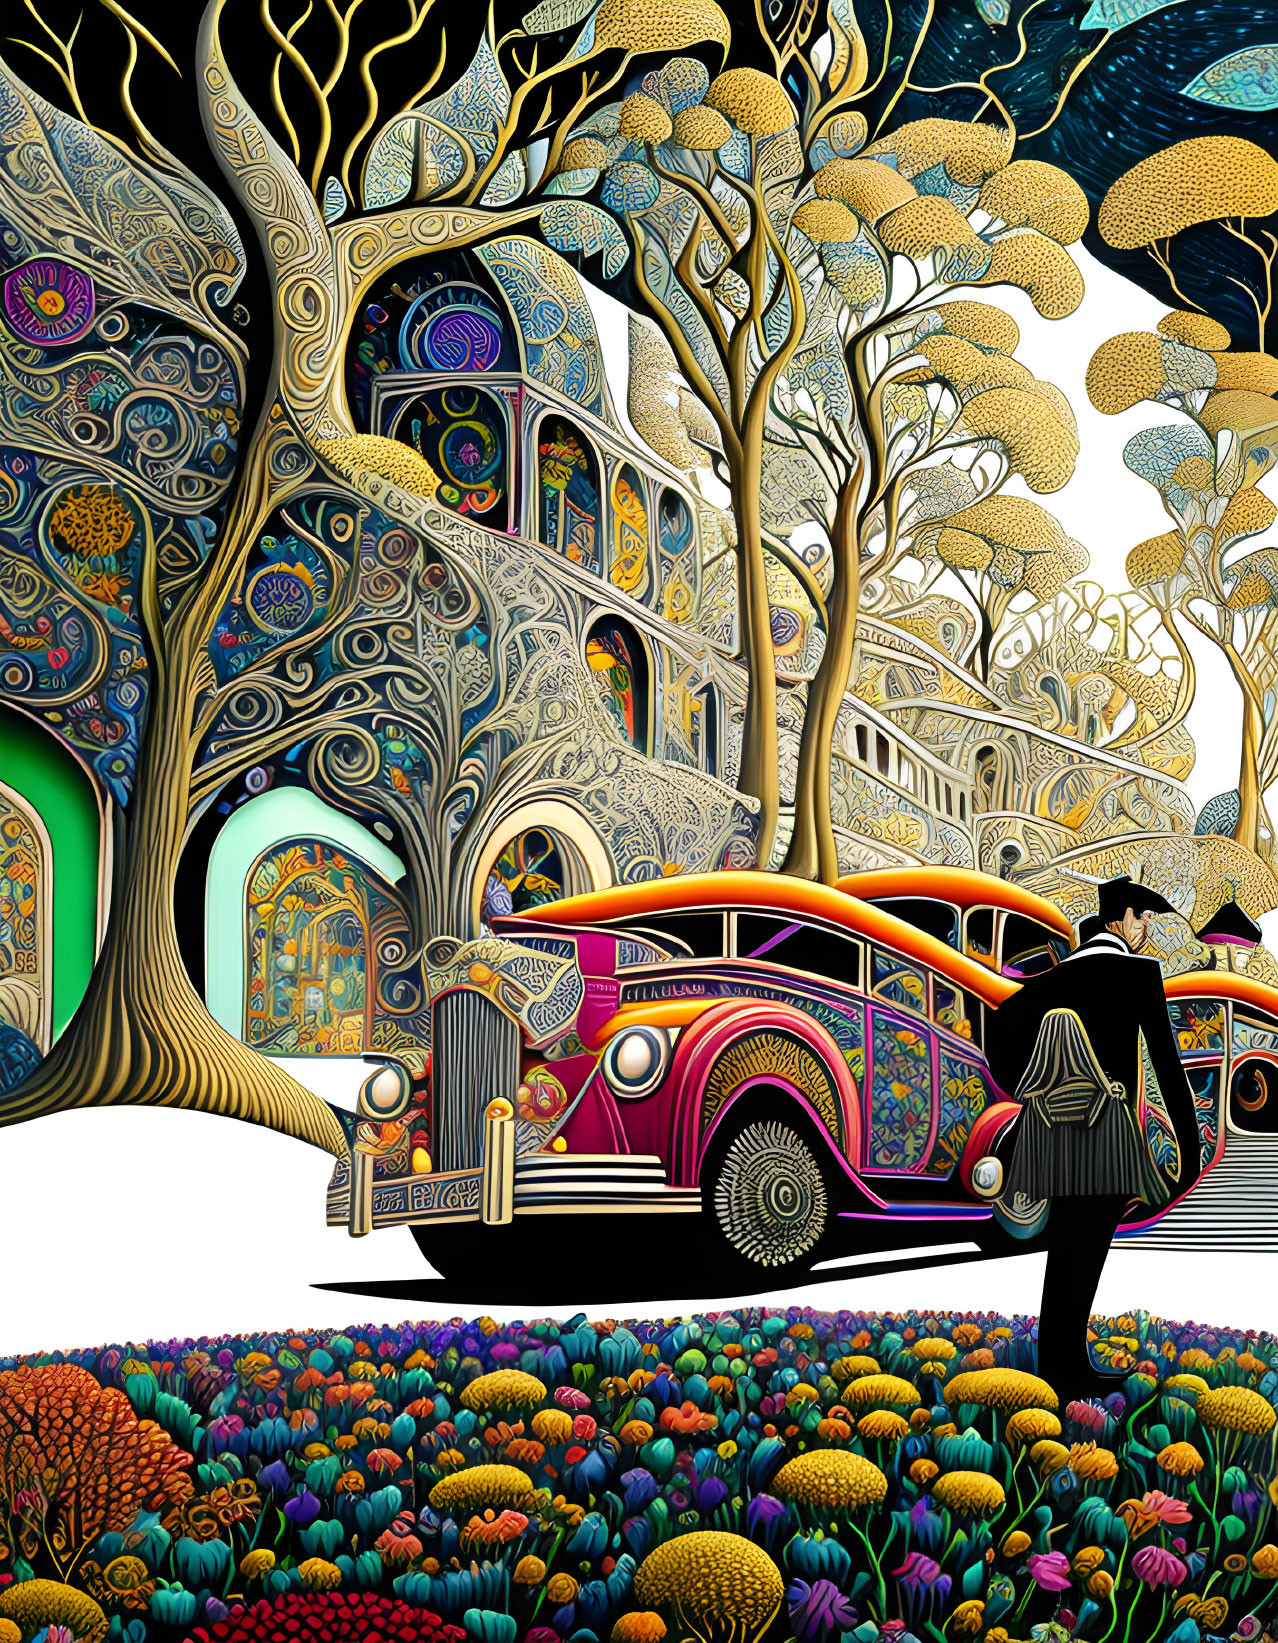 Colorful illustration of man in hat by ornate bus with whimsical tree and flowers